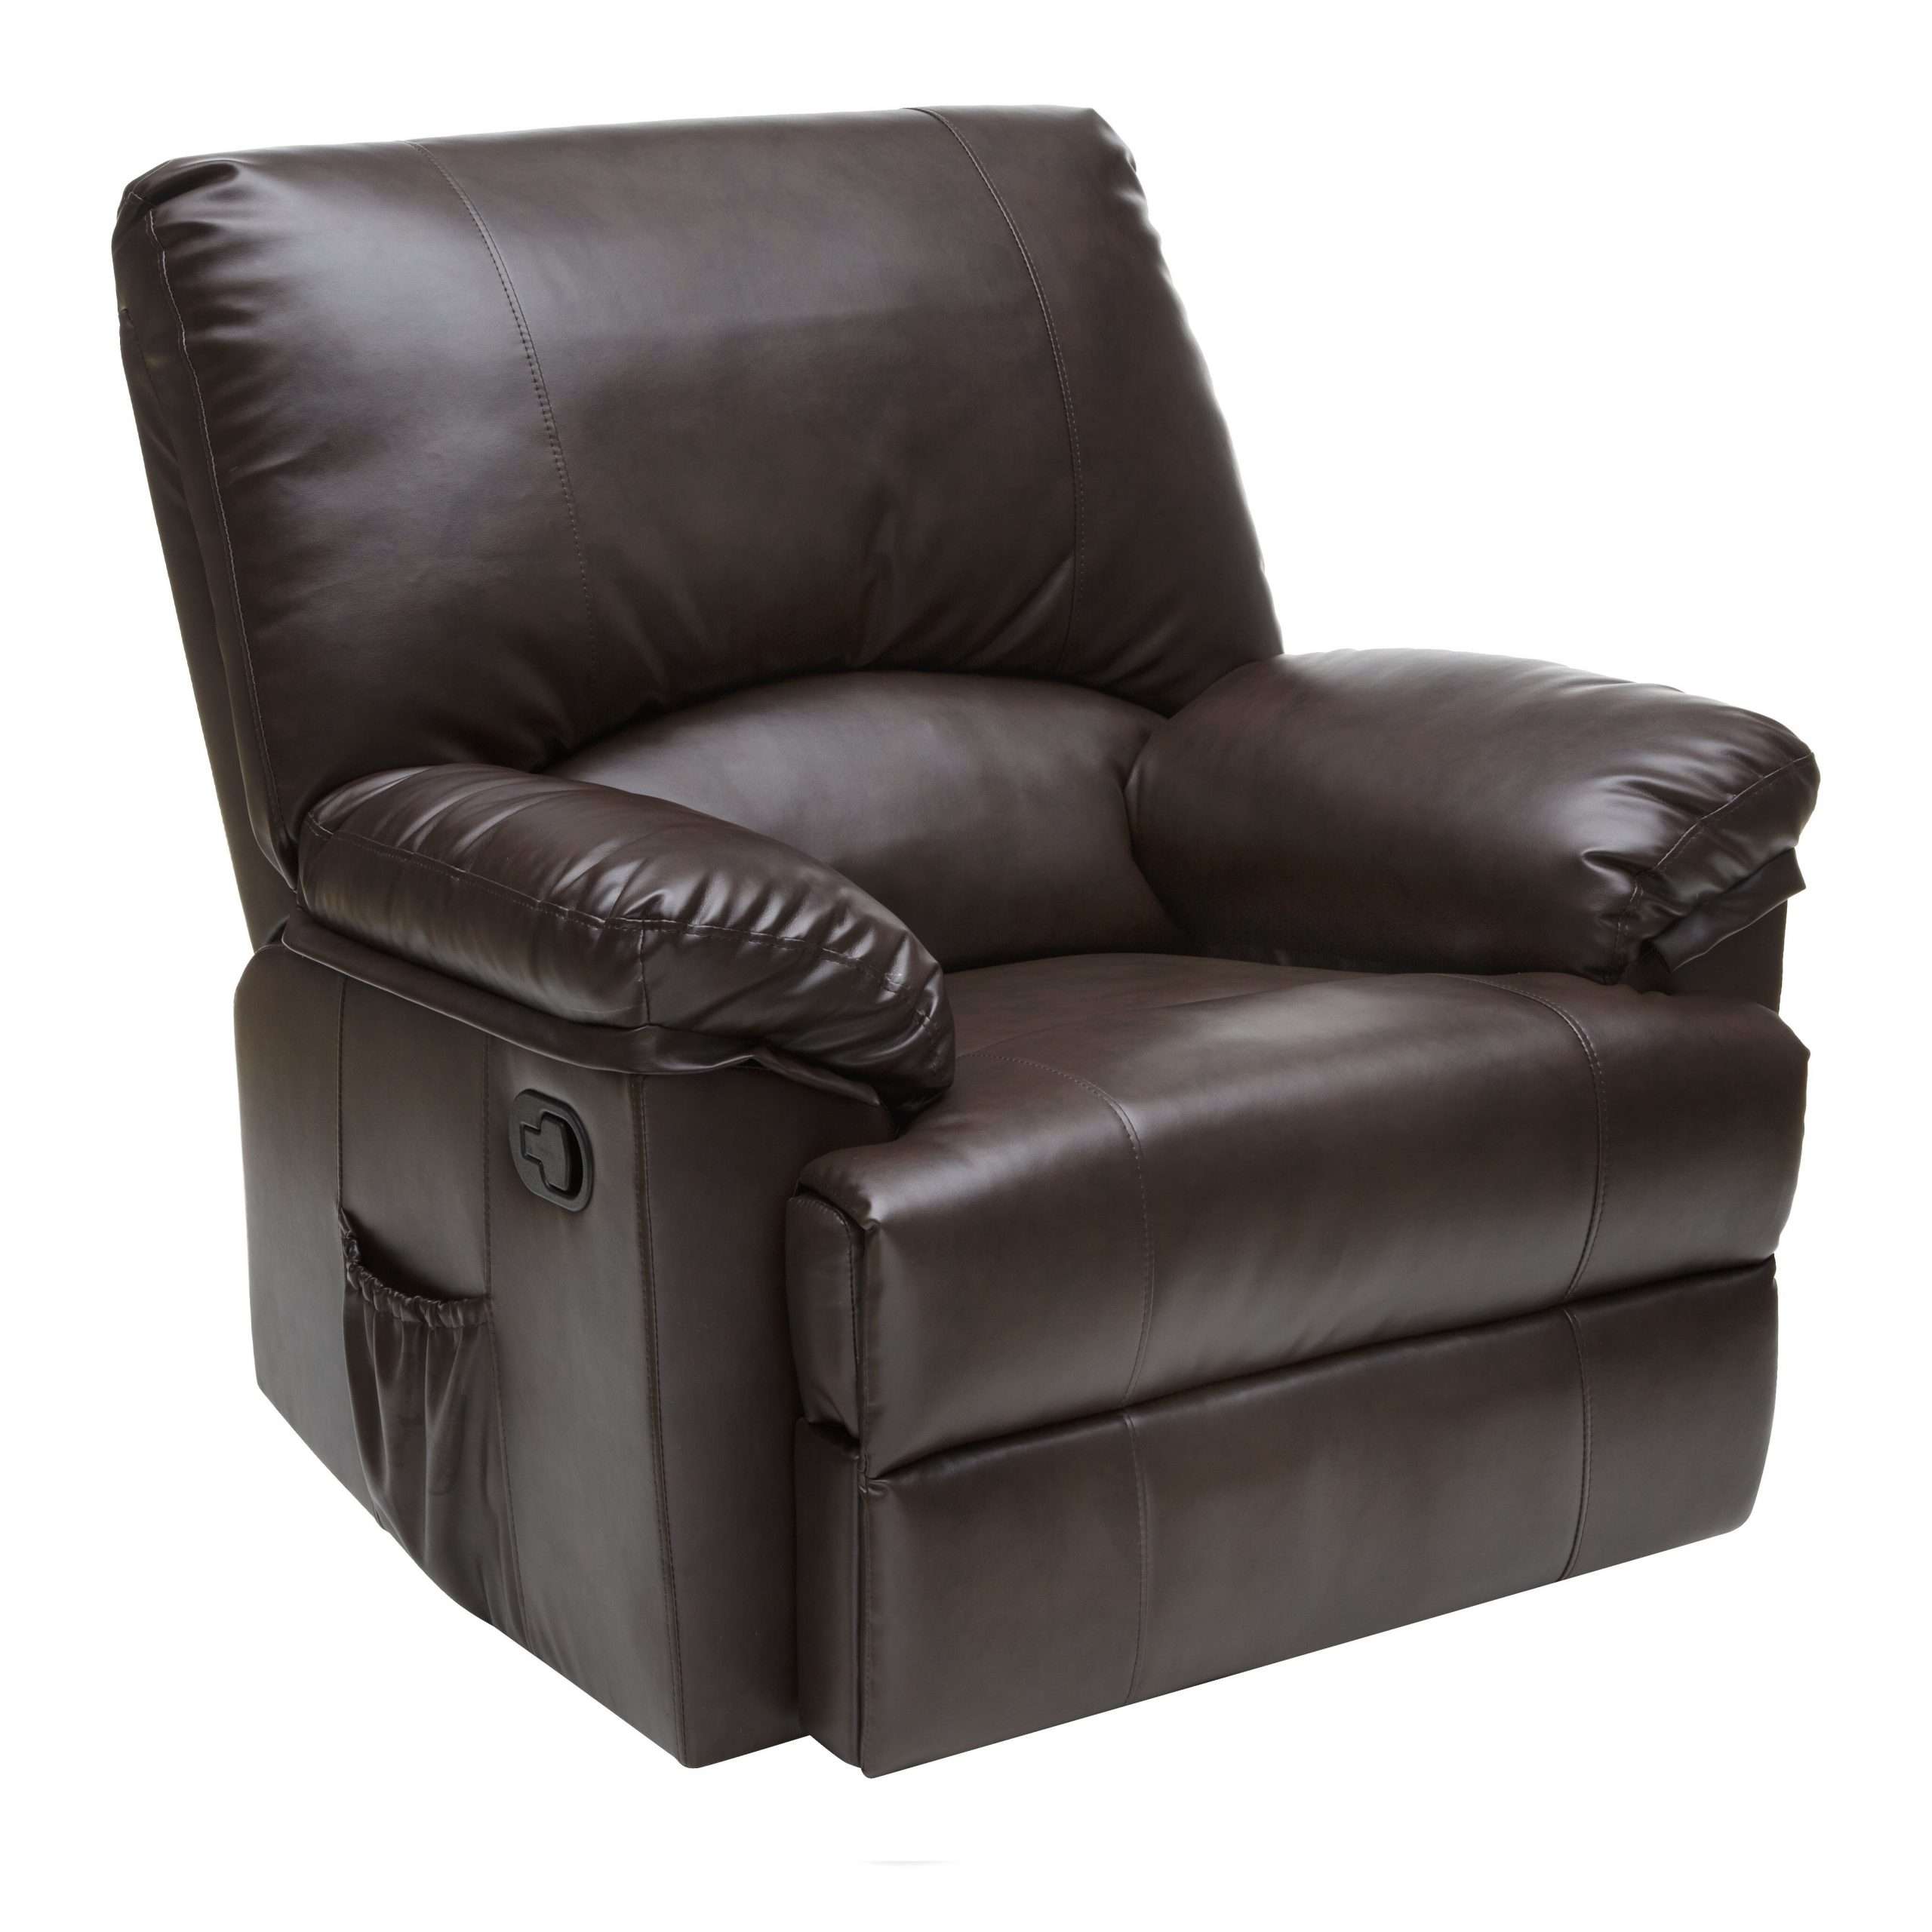 Relaxzen Marbled Leather Rocker Recliner with Heat and ...